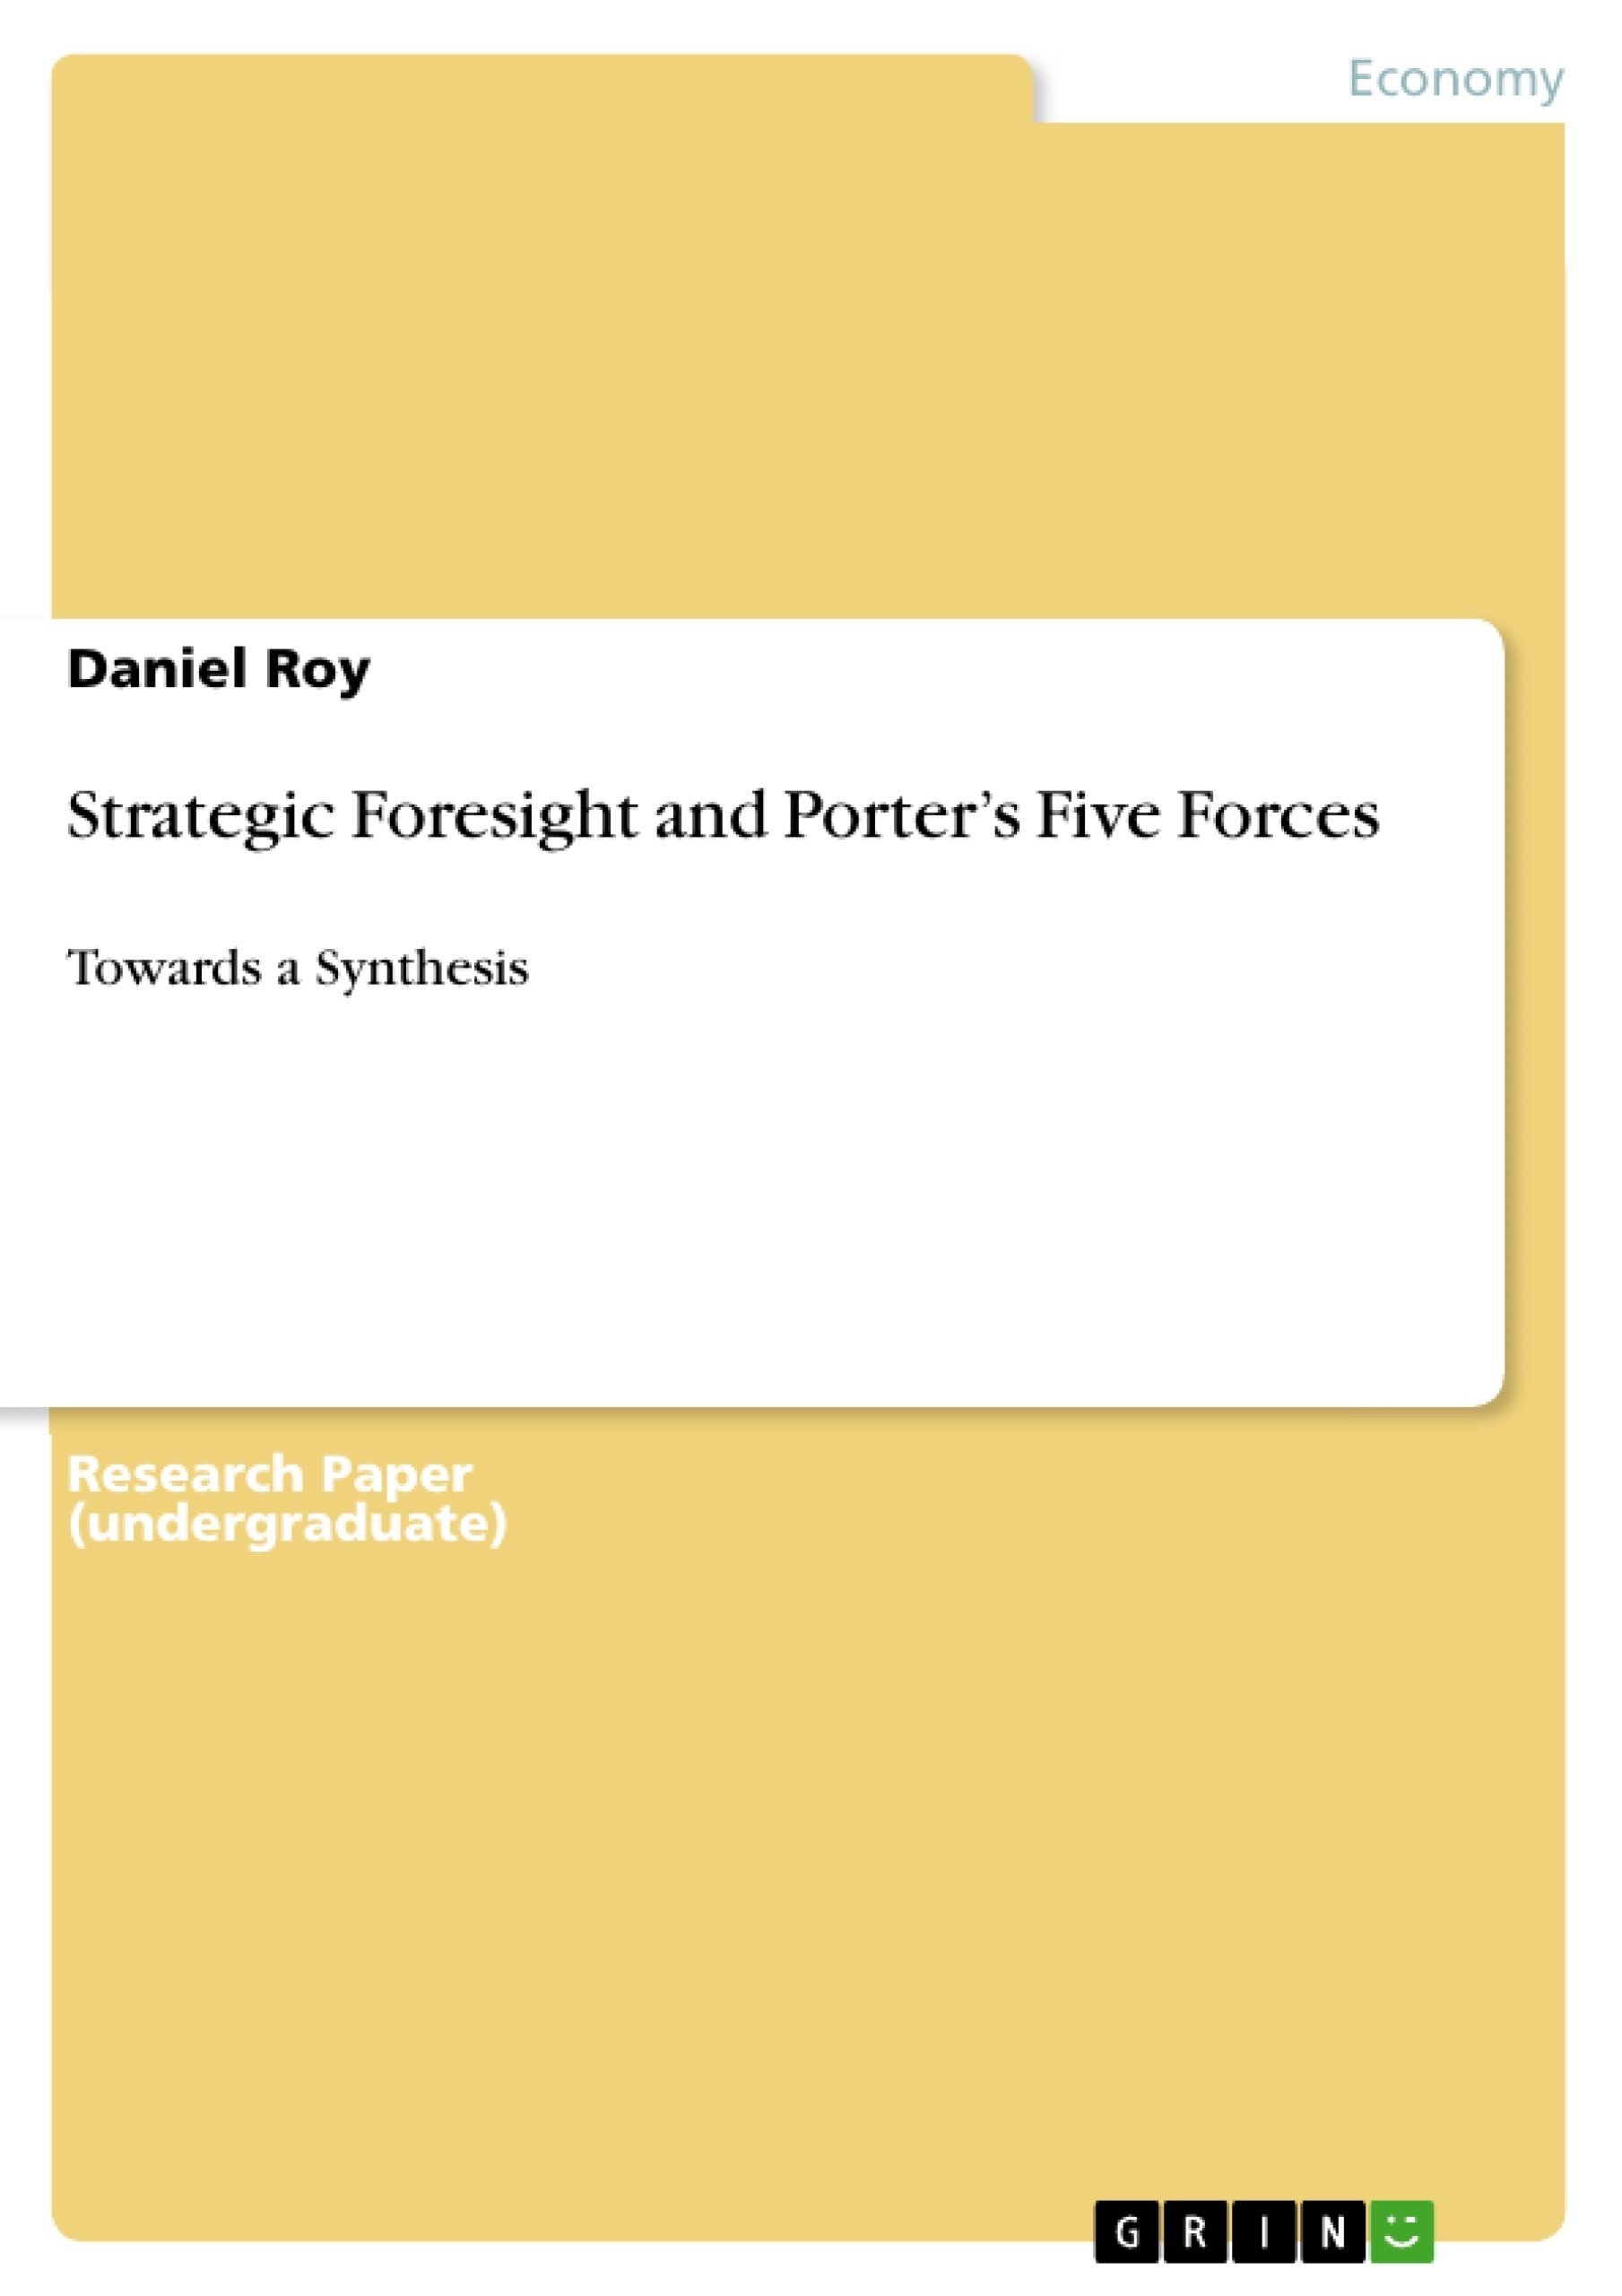 Title: Strategic Foresight and Porter’s Five Forces